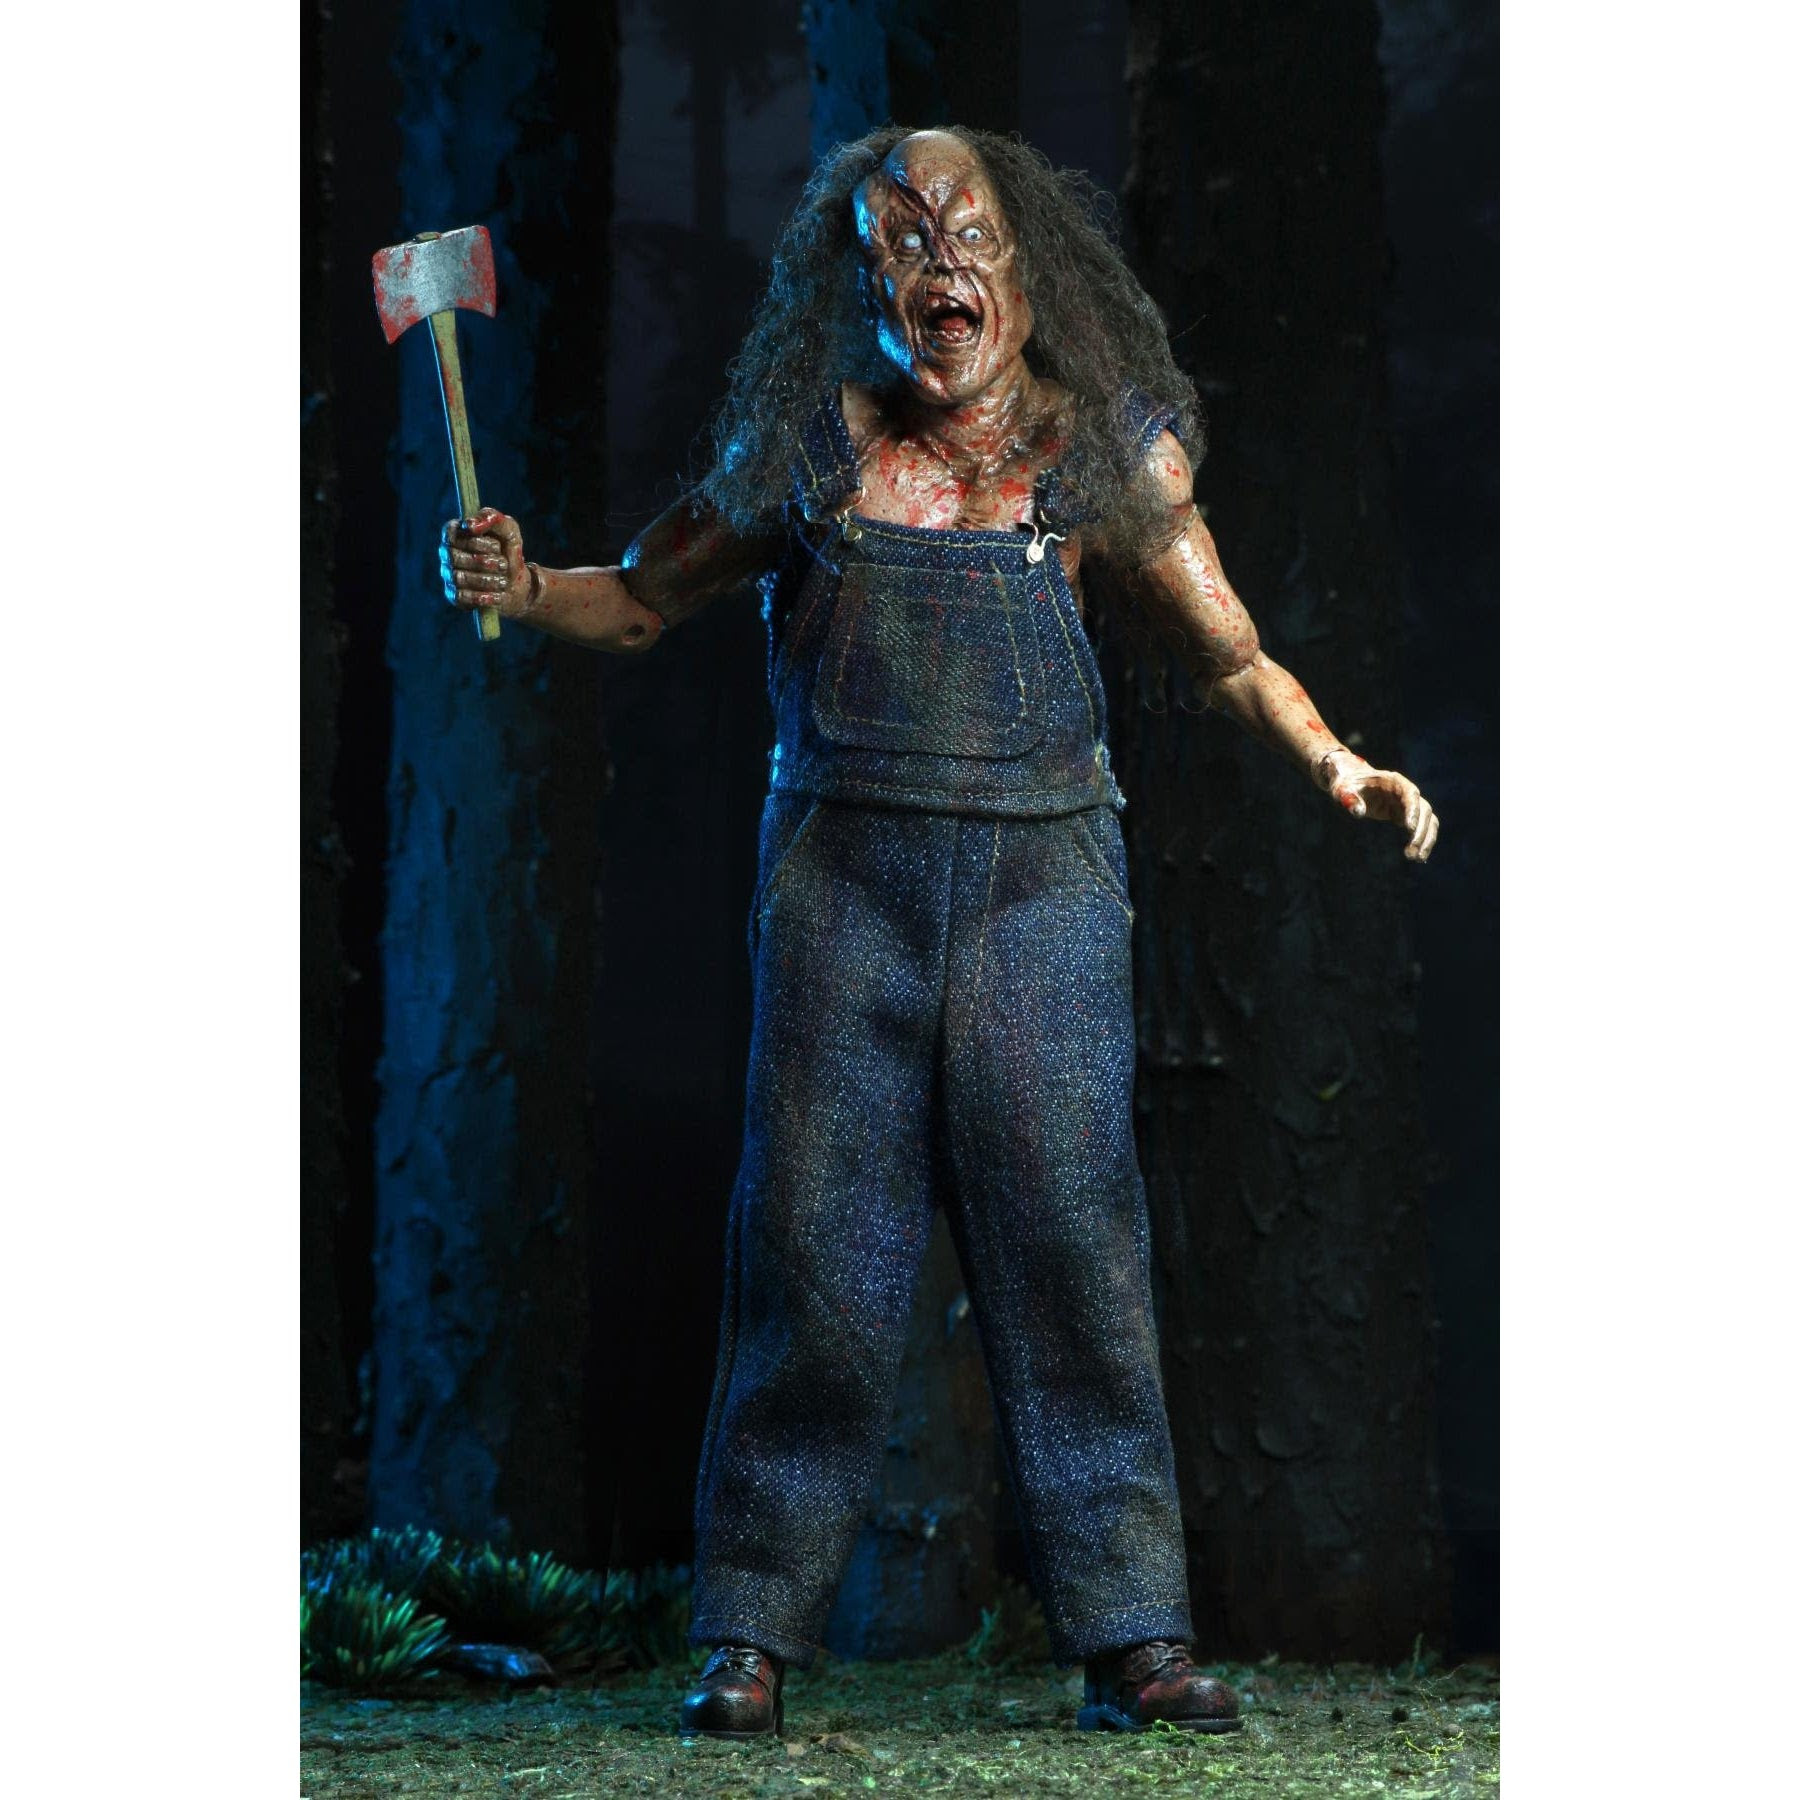 Image of Hatchet – 8” Clothed Action Figure – Victor Crowley - AUGUST 2020